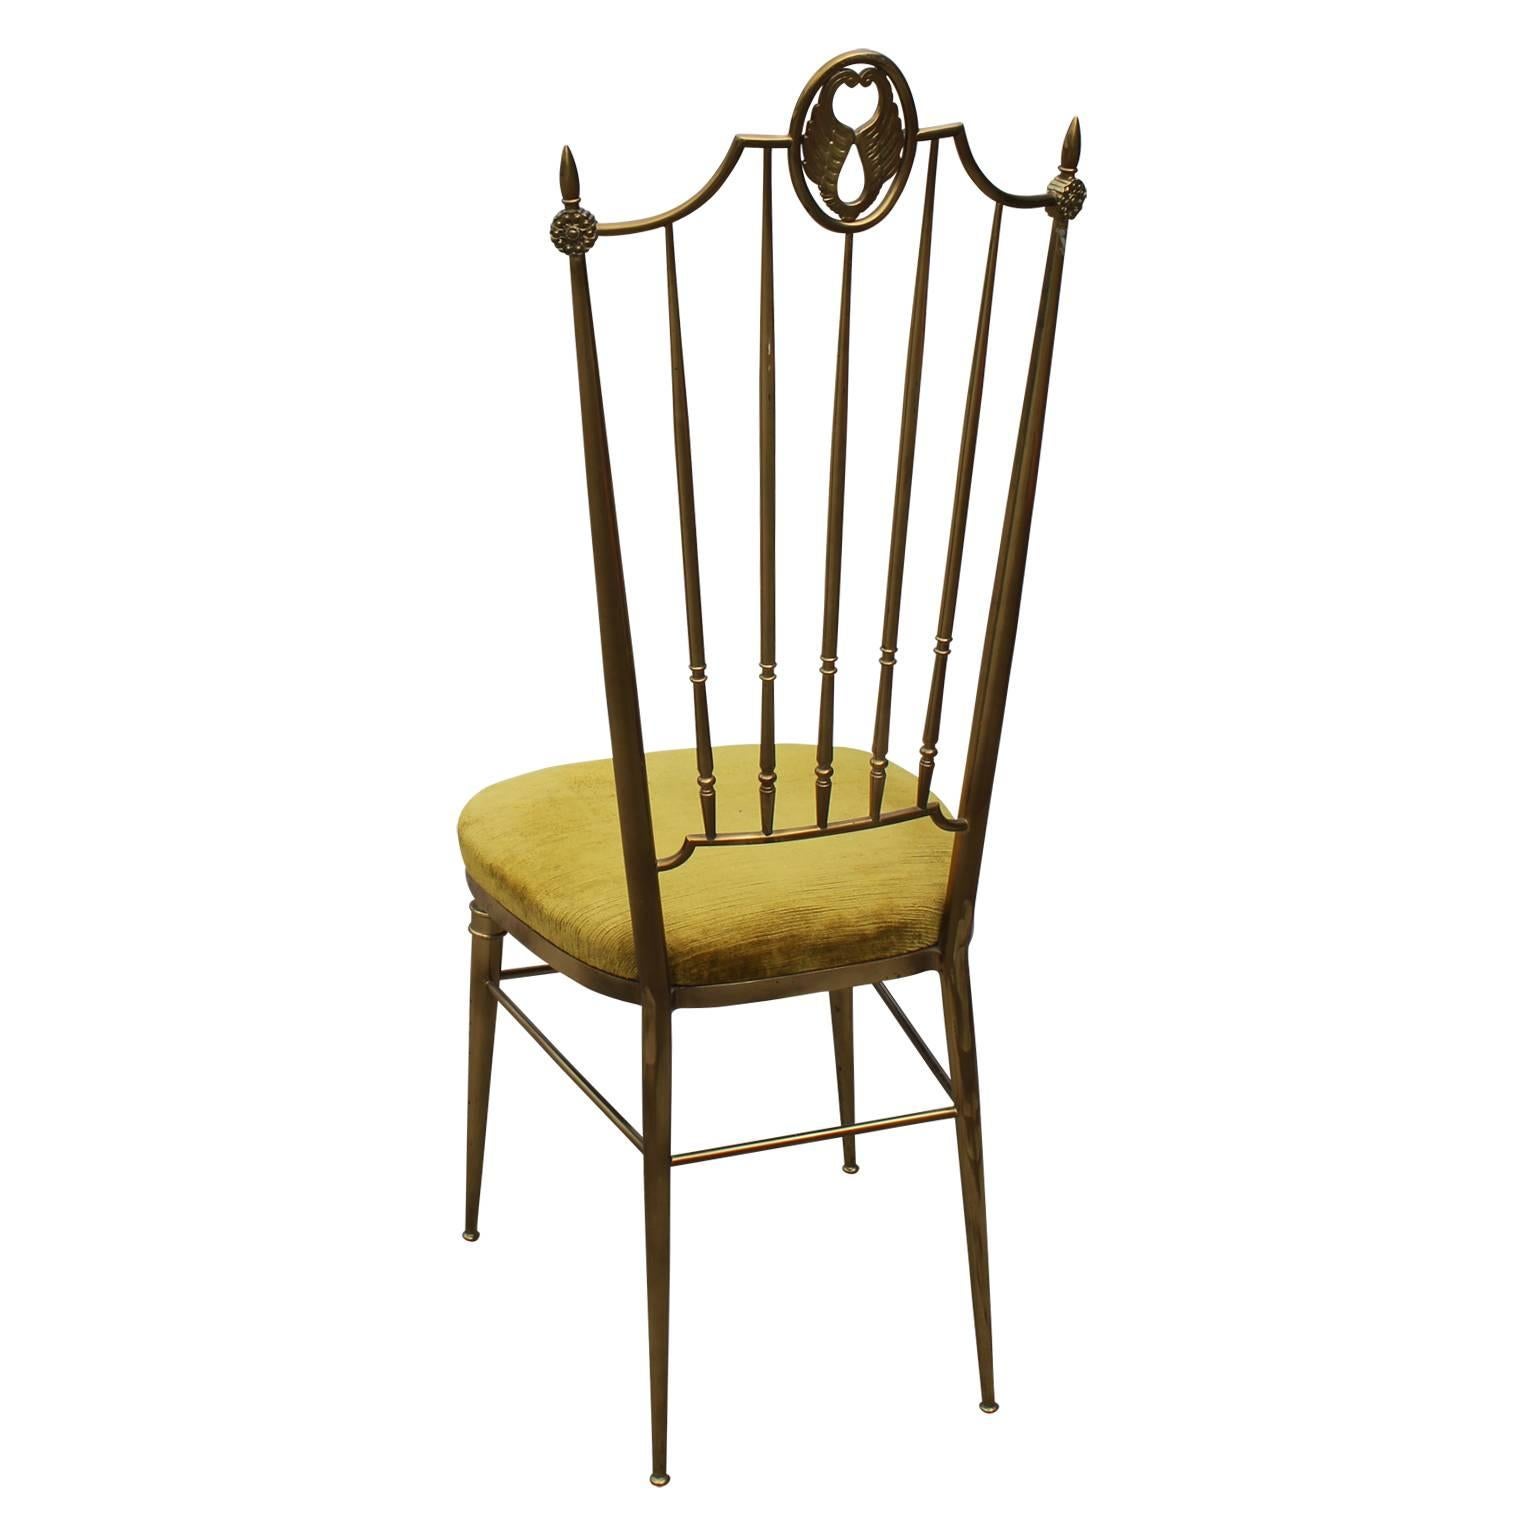 Mid-20th Century Pair of Italian Ponti Style Hollywood Regency Brass and Yellow Velvet Chairs